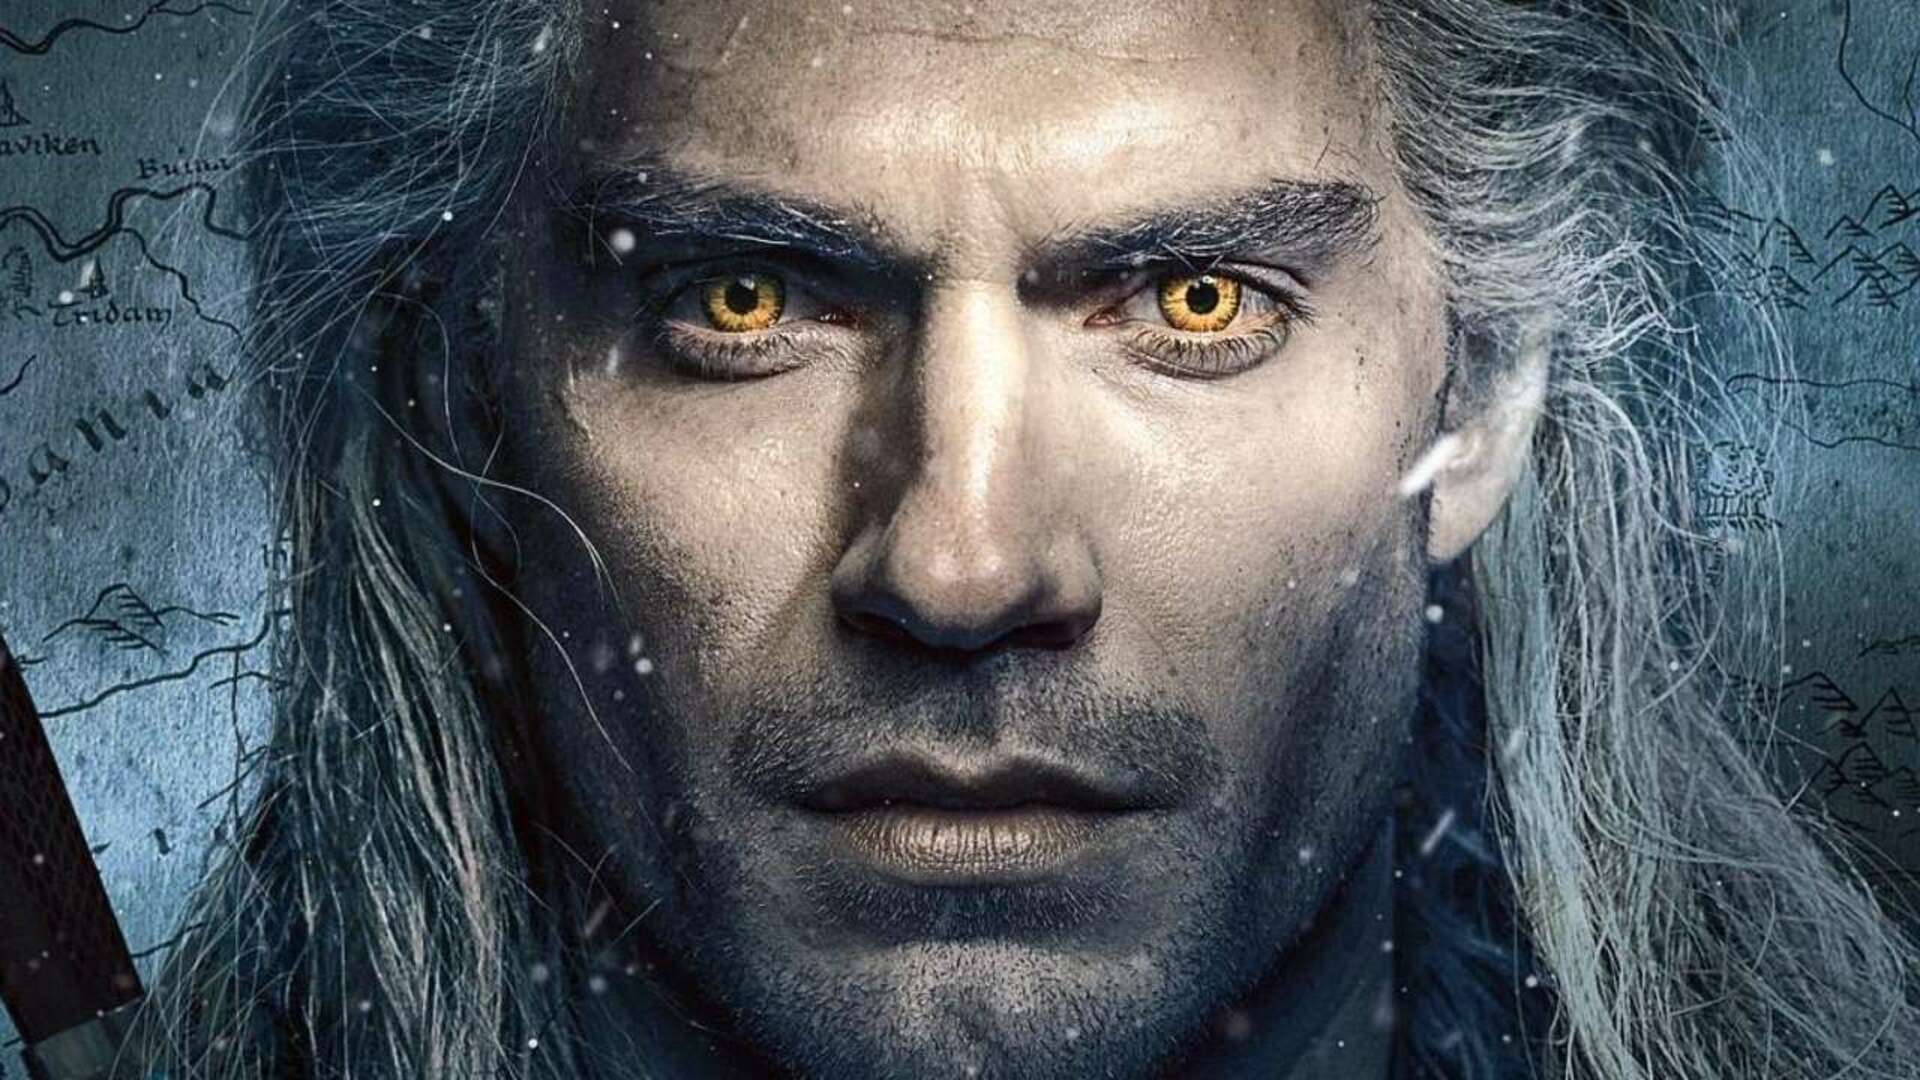 New The Witcher Season 2 Wallpapers